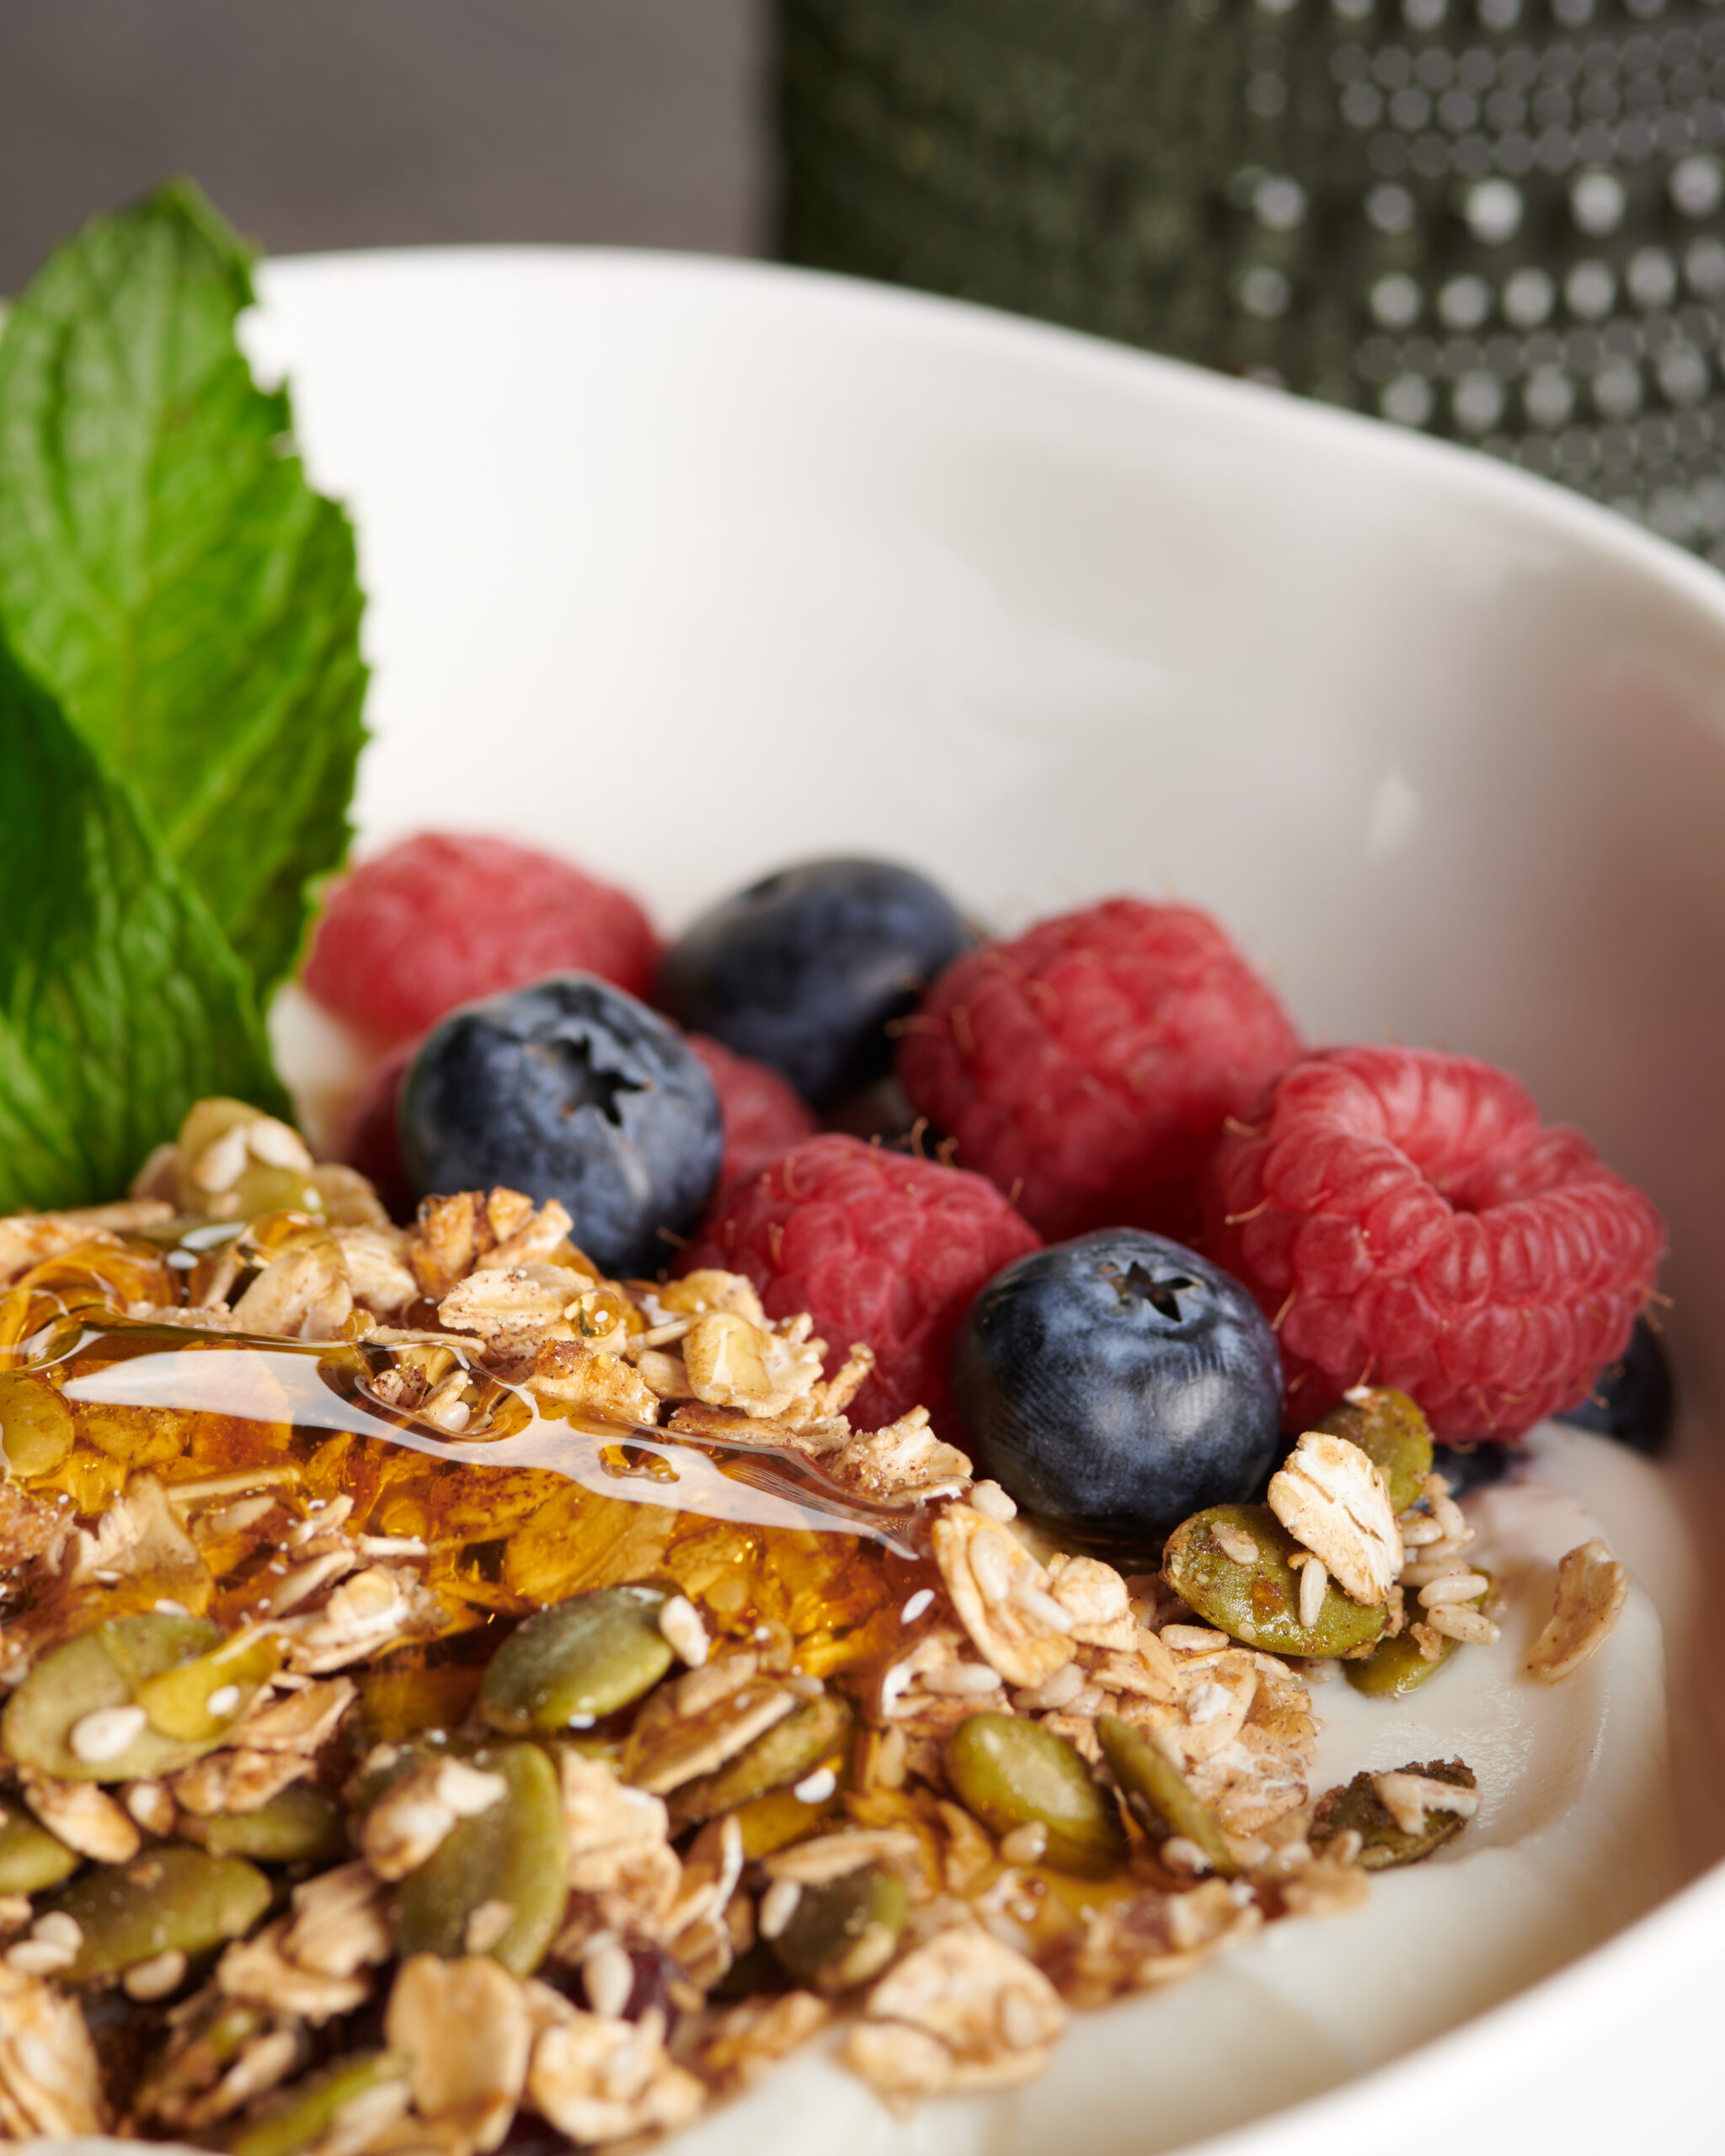 El Paso Food Photography - Oatmeal with honey and fruit.